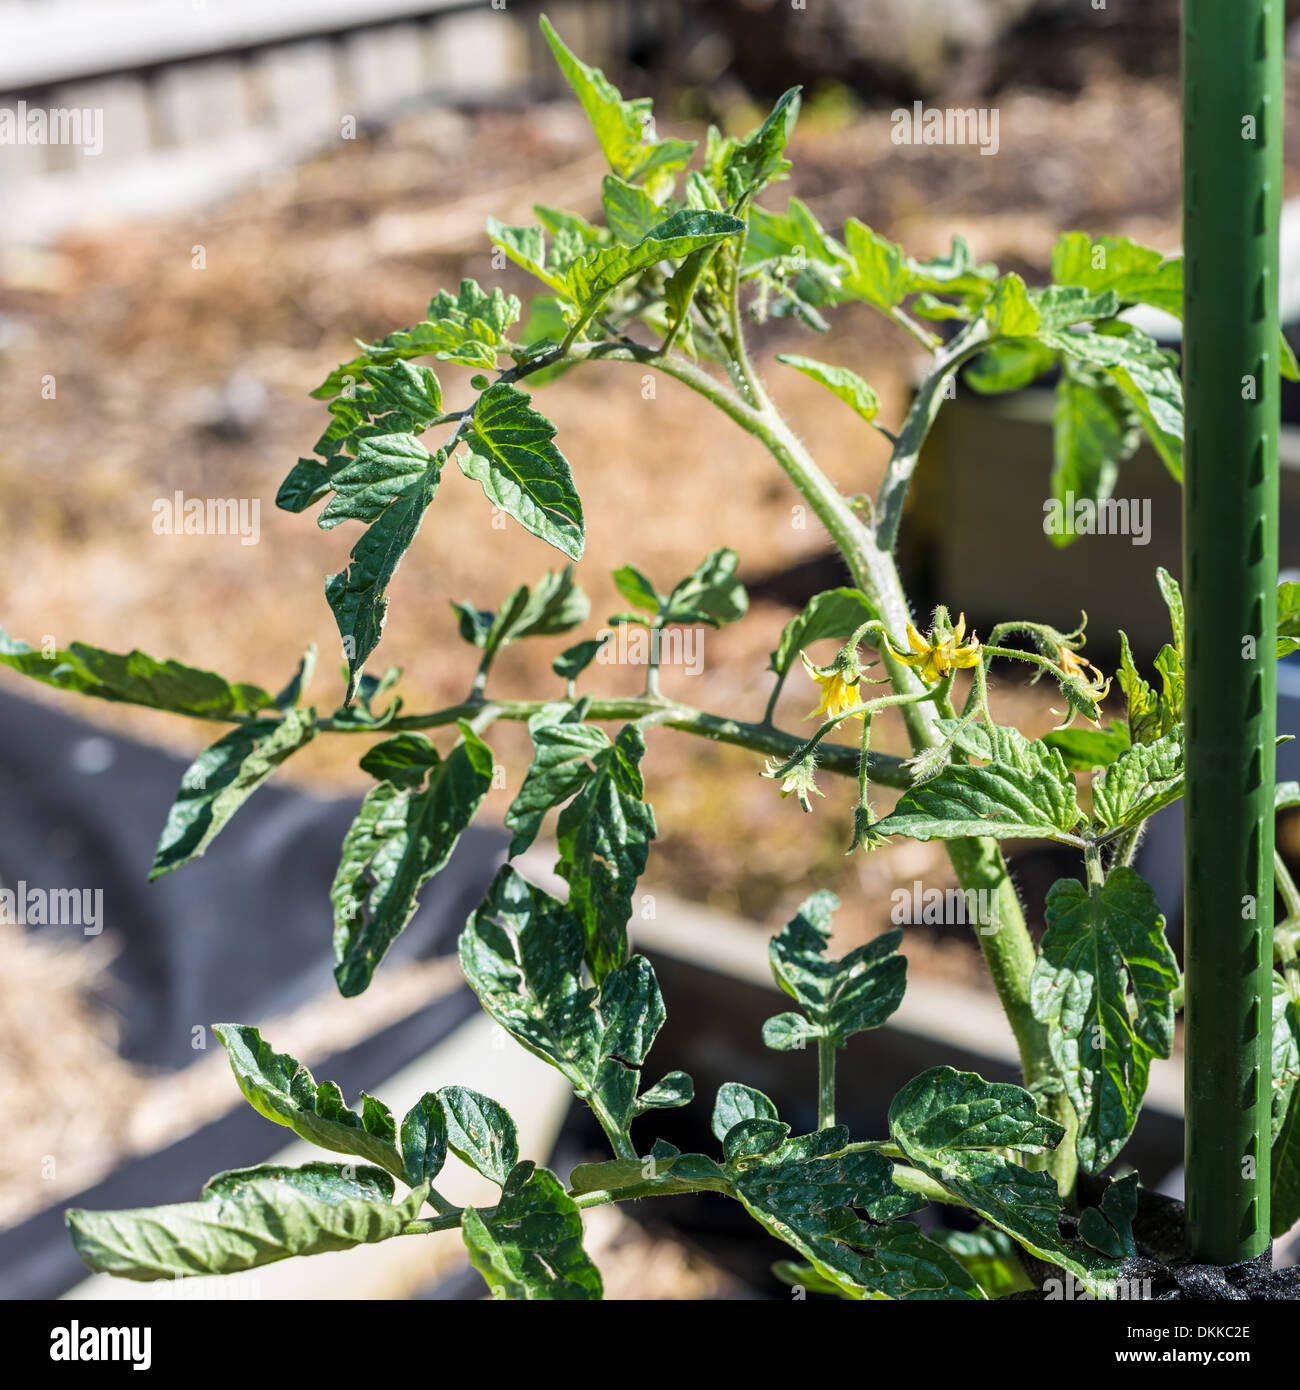 Closeup of staked tomato plant showing Stock Photo